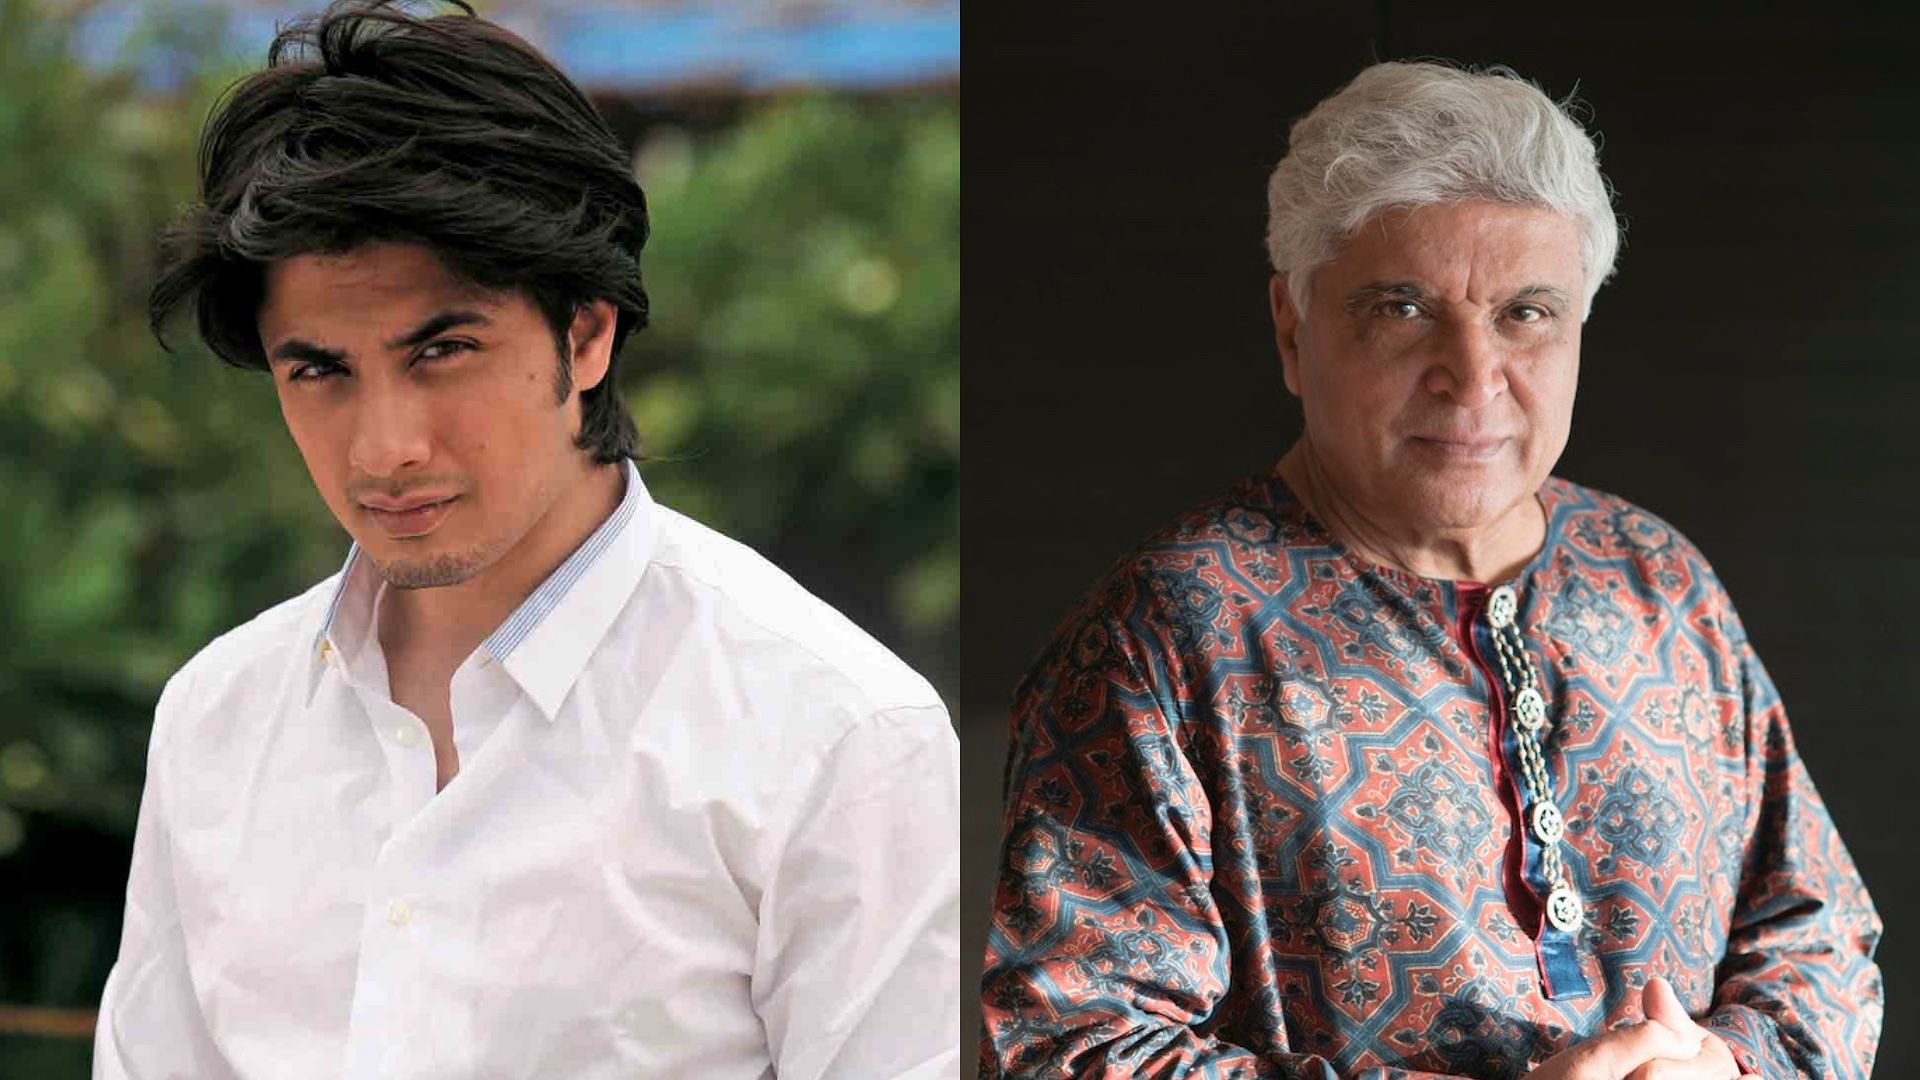 <div class="paragraphs"><p>Ali Zafar on Javed Akhtar's 26/11 Comments, Call It 'Insensitive'.&nbsp;</p></div>